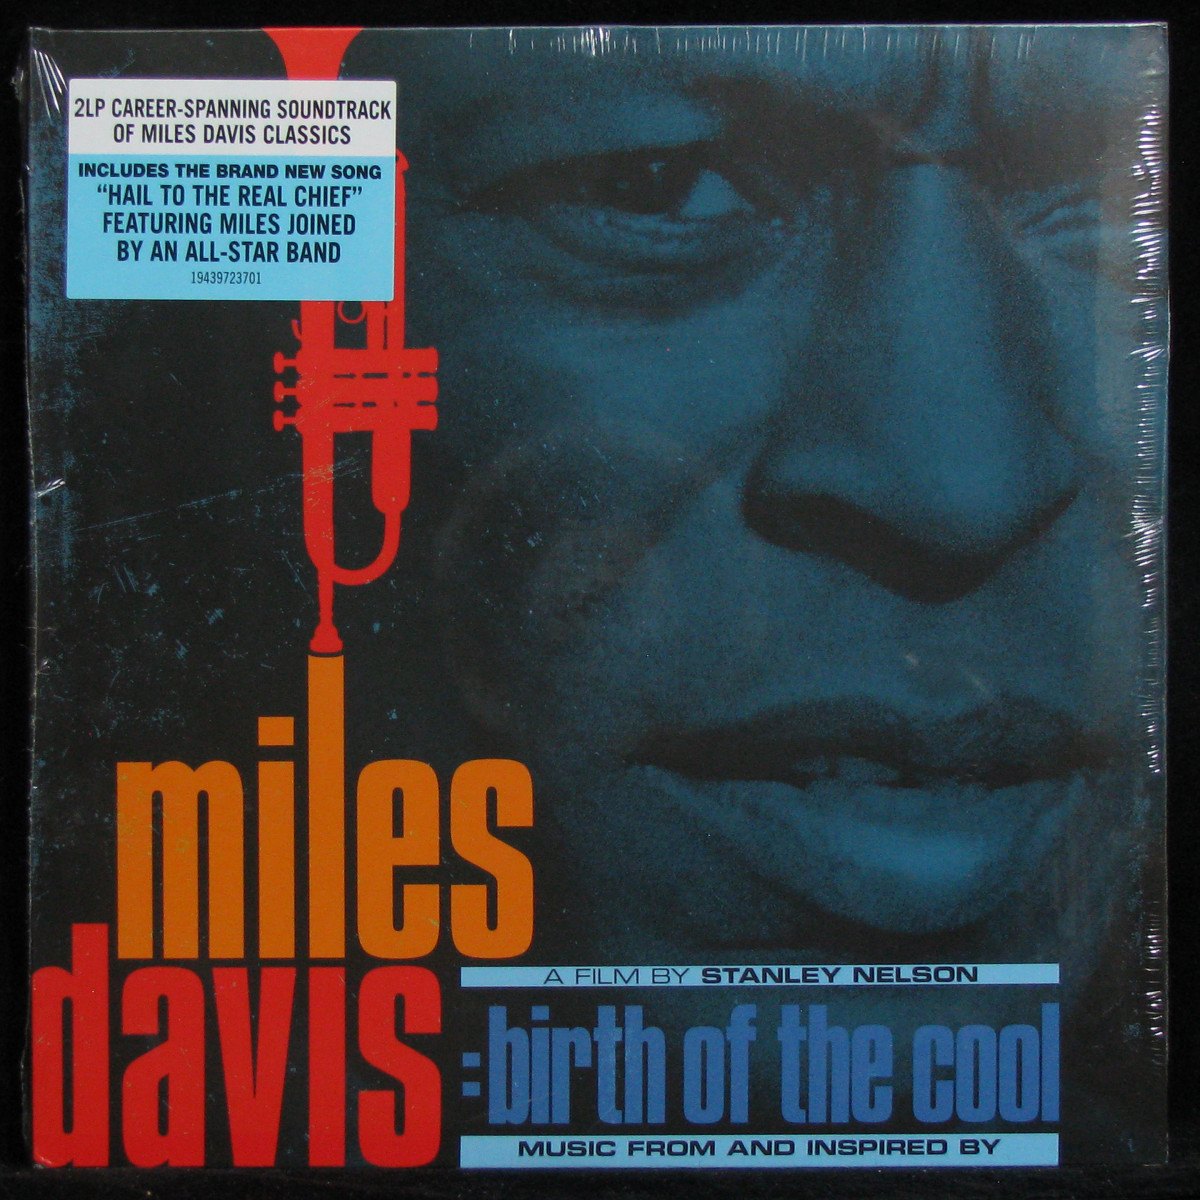 Music From And Inspired By Miles Davis: Birth Of The Cool